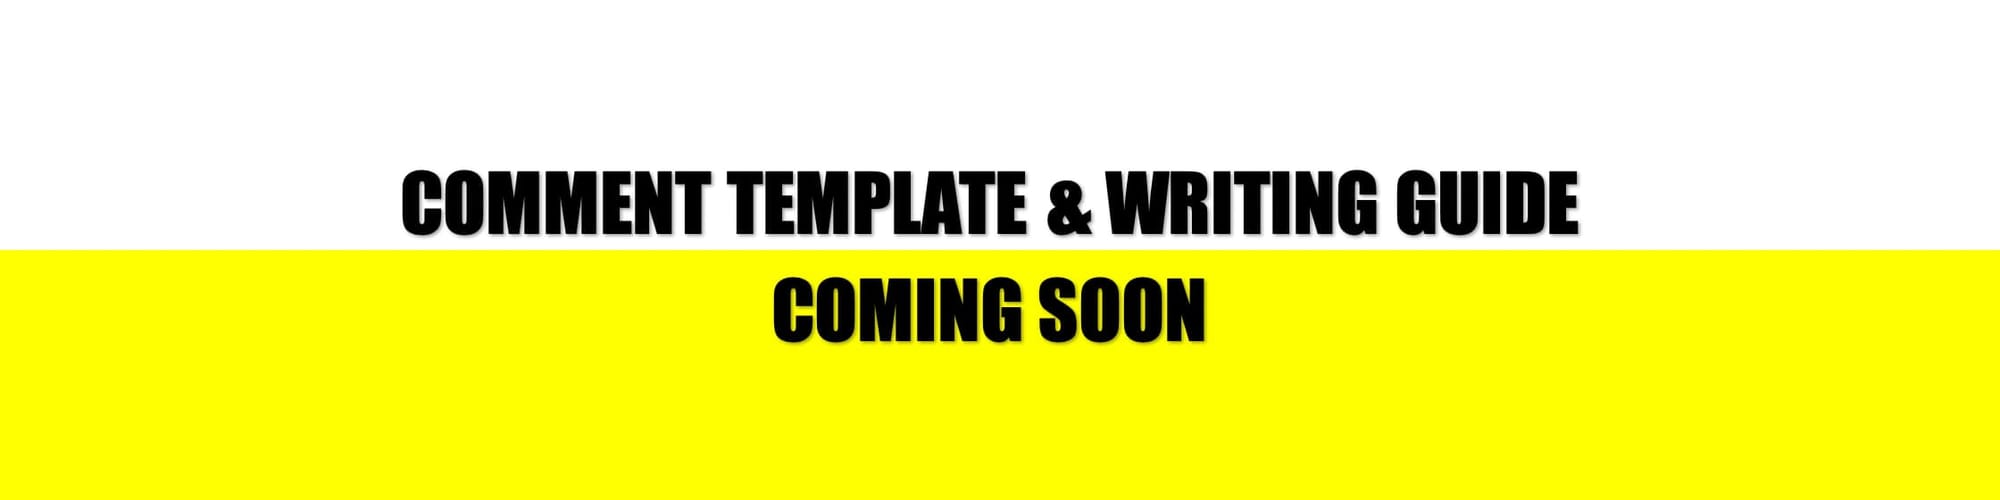 COMMENT TEMPLATE & WRITING GUIDE COMING SOON